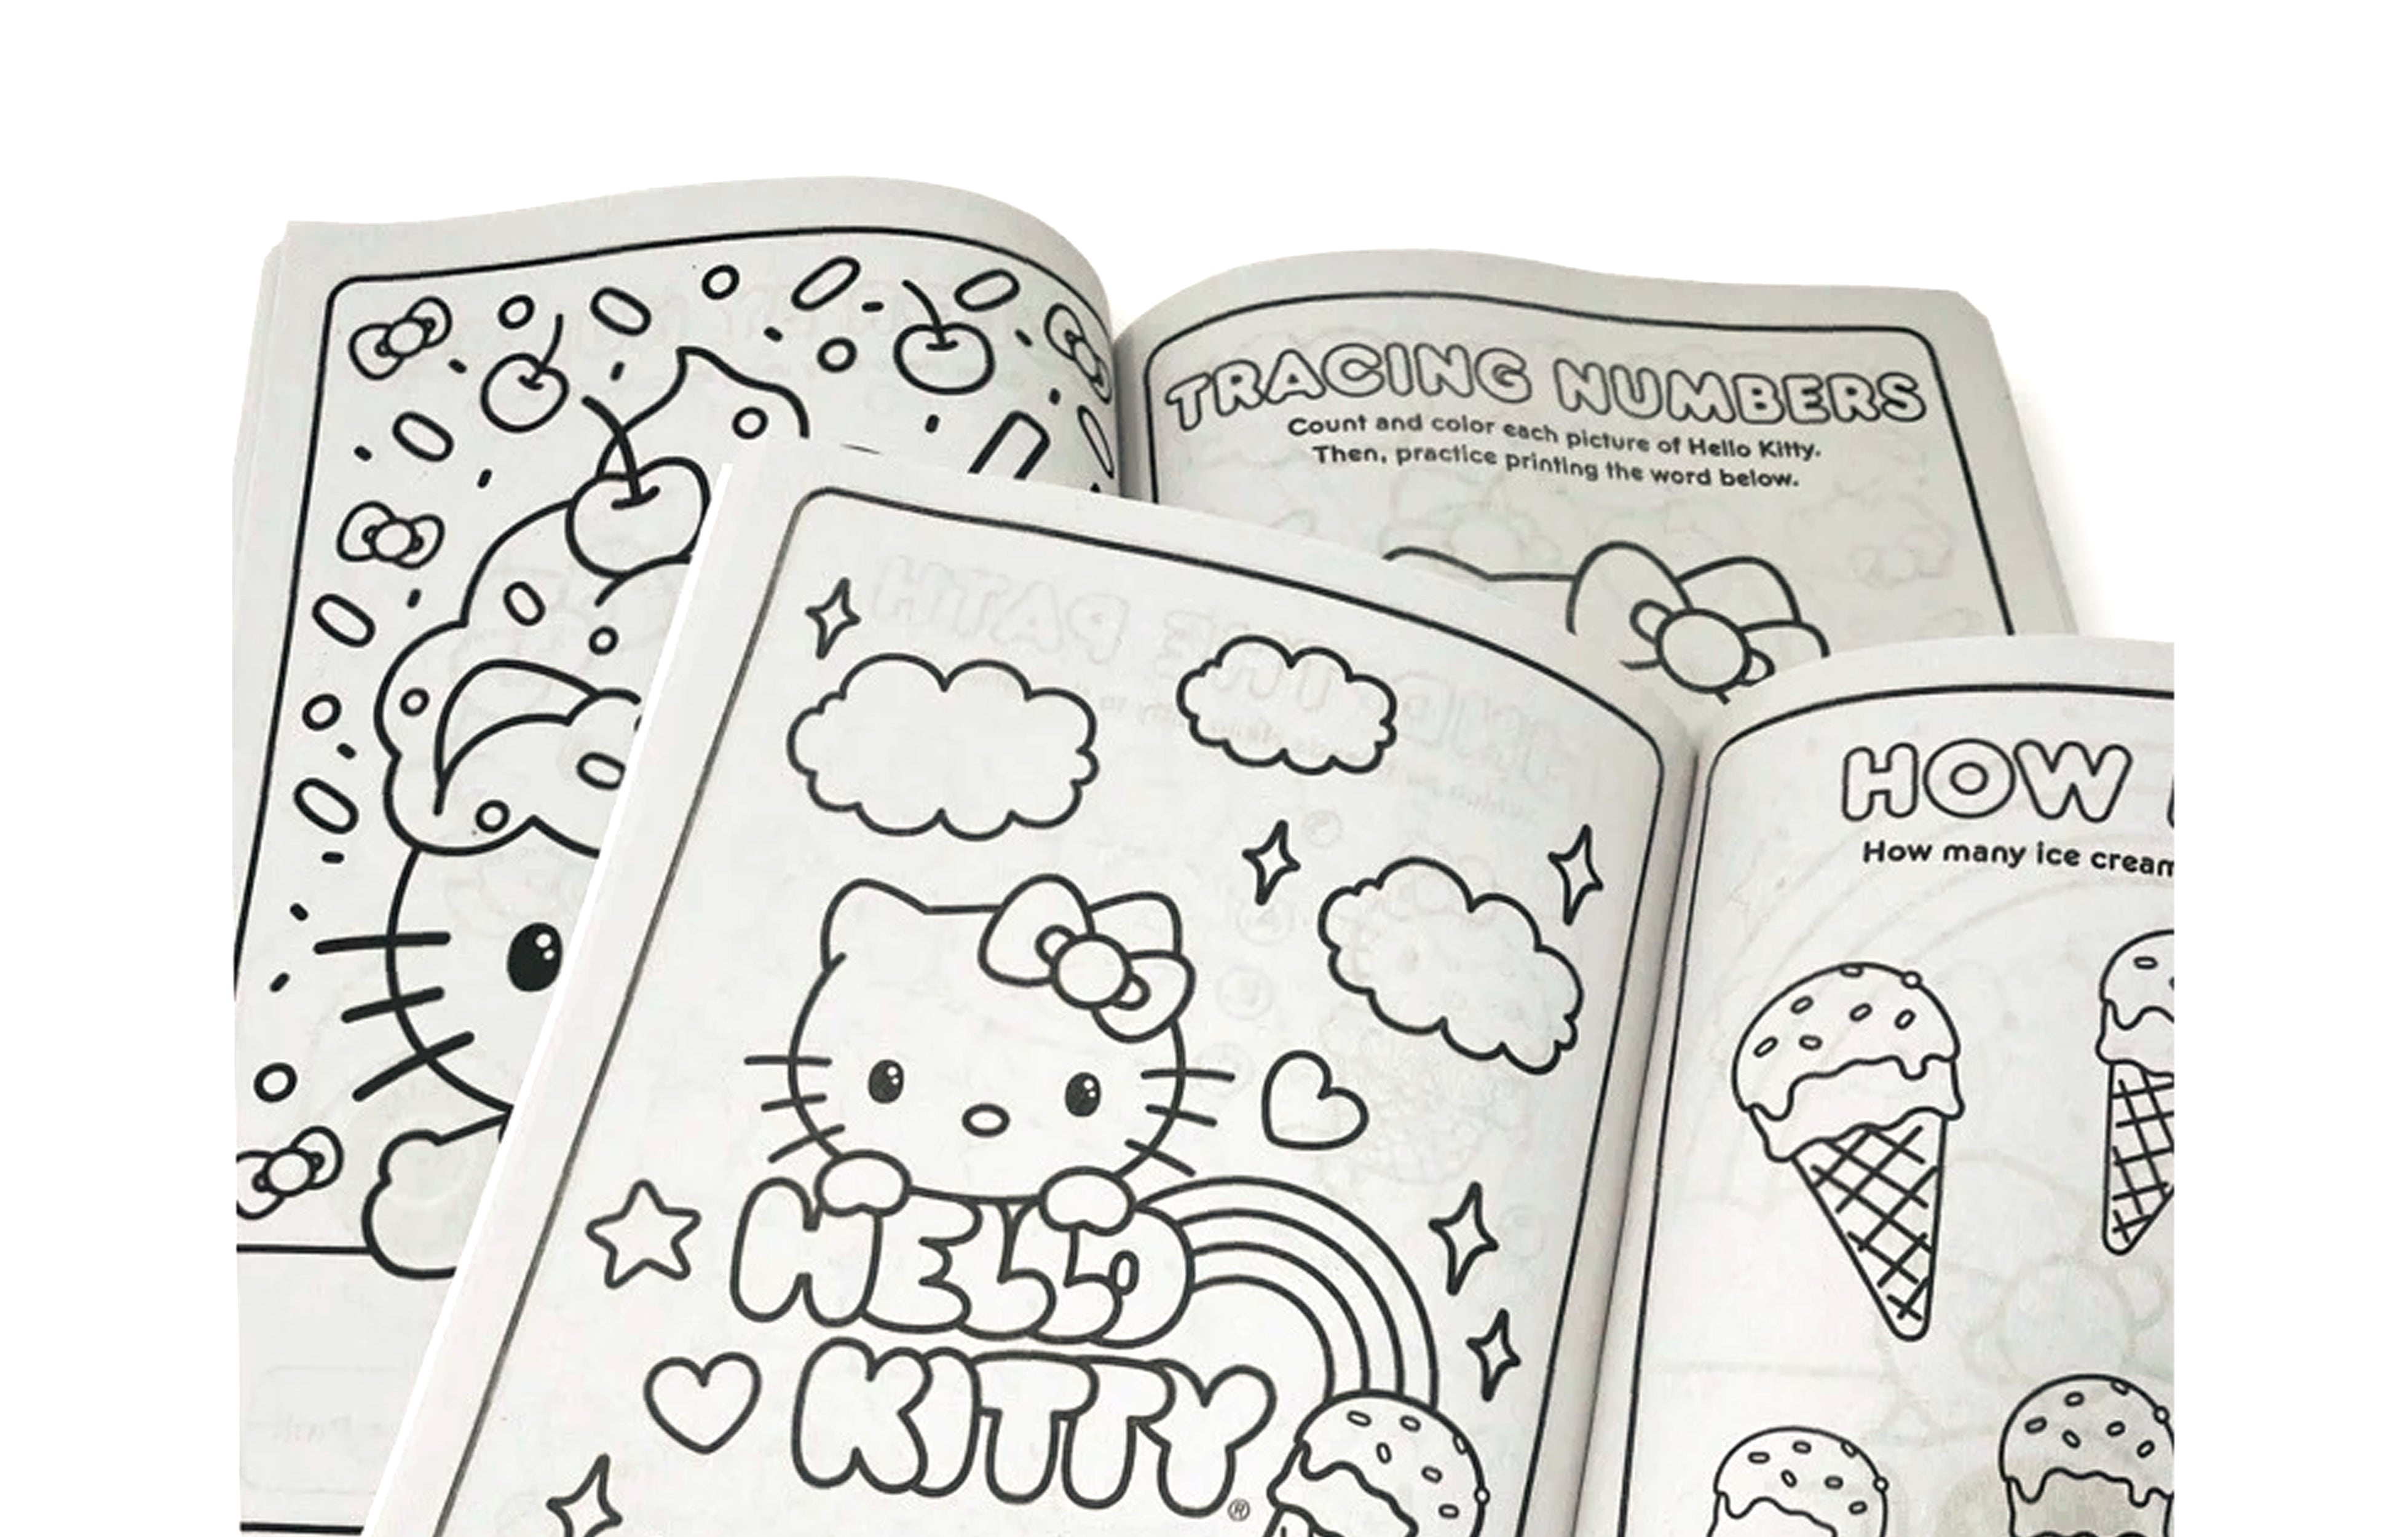 Hello Kitty Coloring Book : JUMBO COLORING BOOK +80 High illustrations  Coloring Book for Kids, Adults high coloring pages for fans of hello kitty